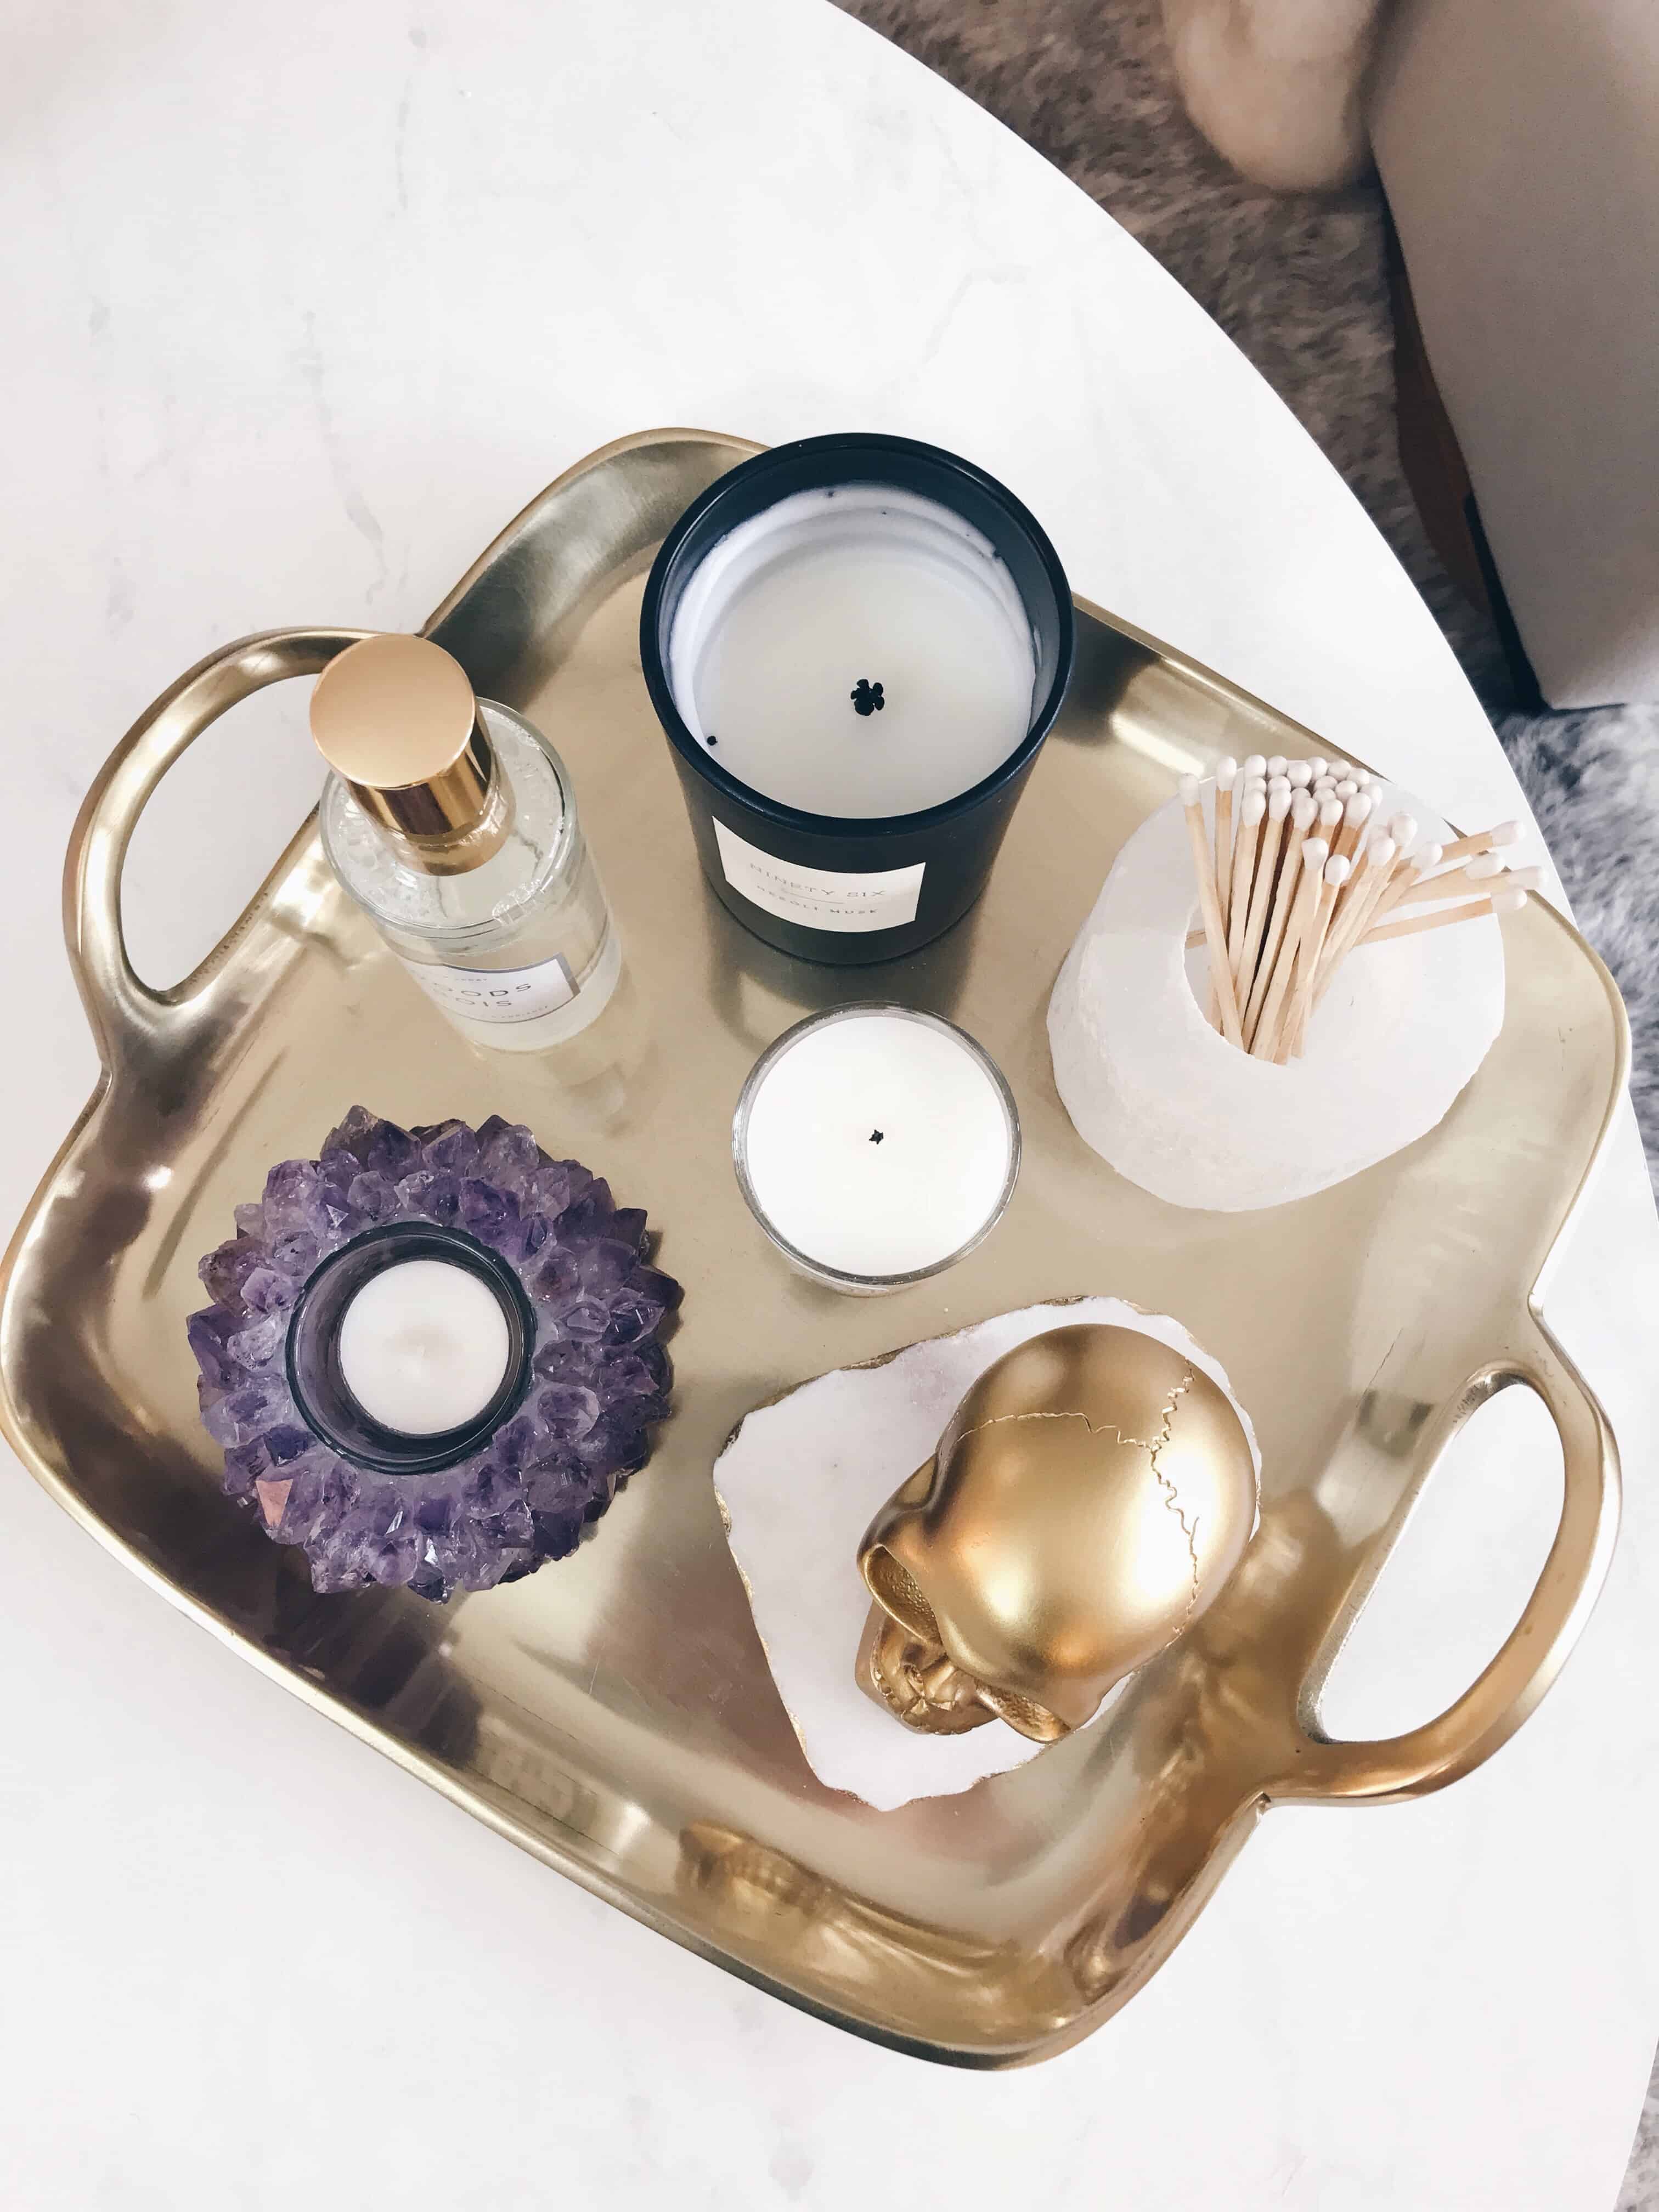 6 places to consider using trays in your home (& quick ideas on how to style them)